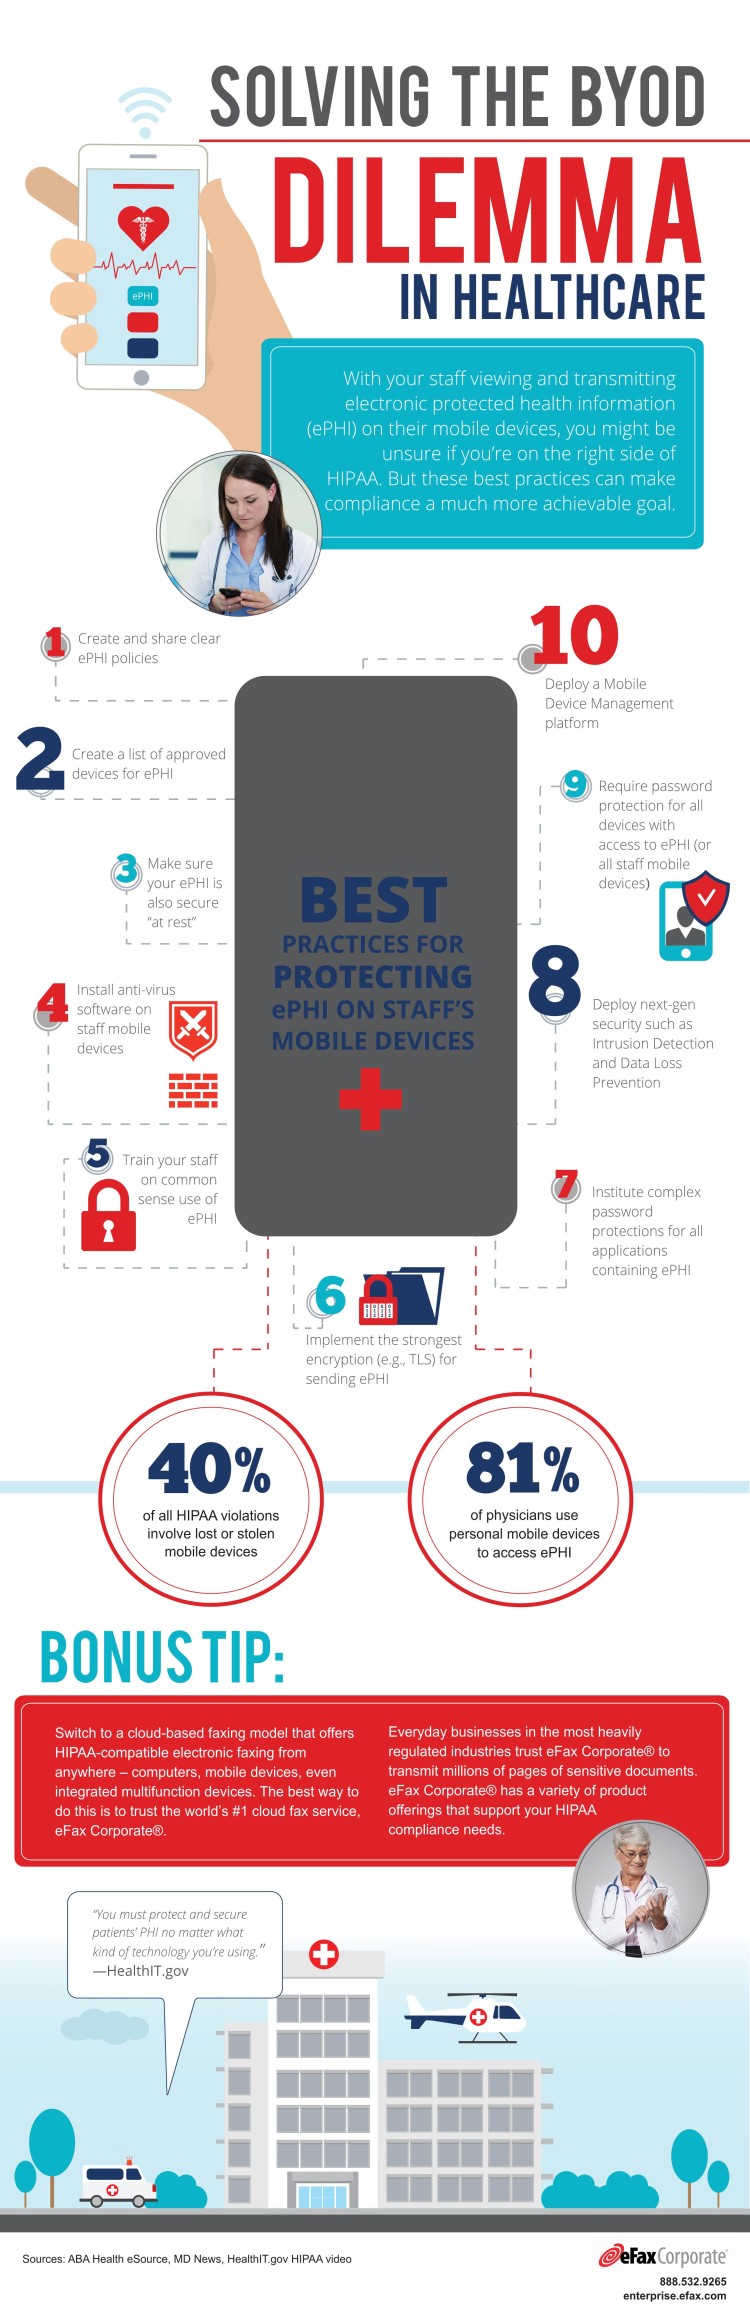 Solving the BYOD Dilemma in Healthcare: 10 Best Practices for Protecting ePHI on Staff’s Mobile Devices